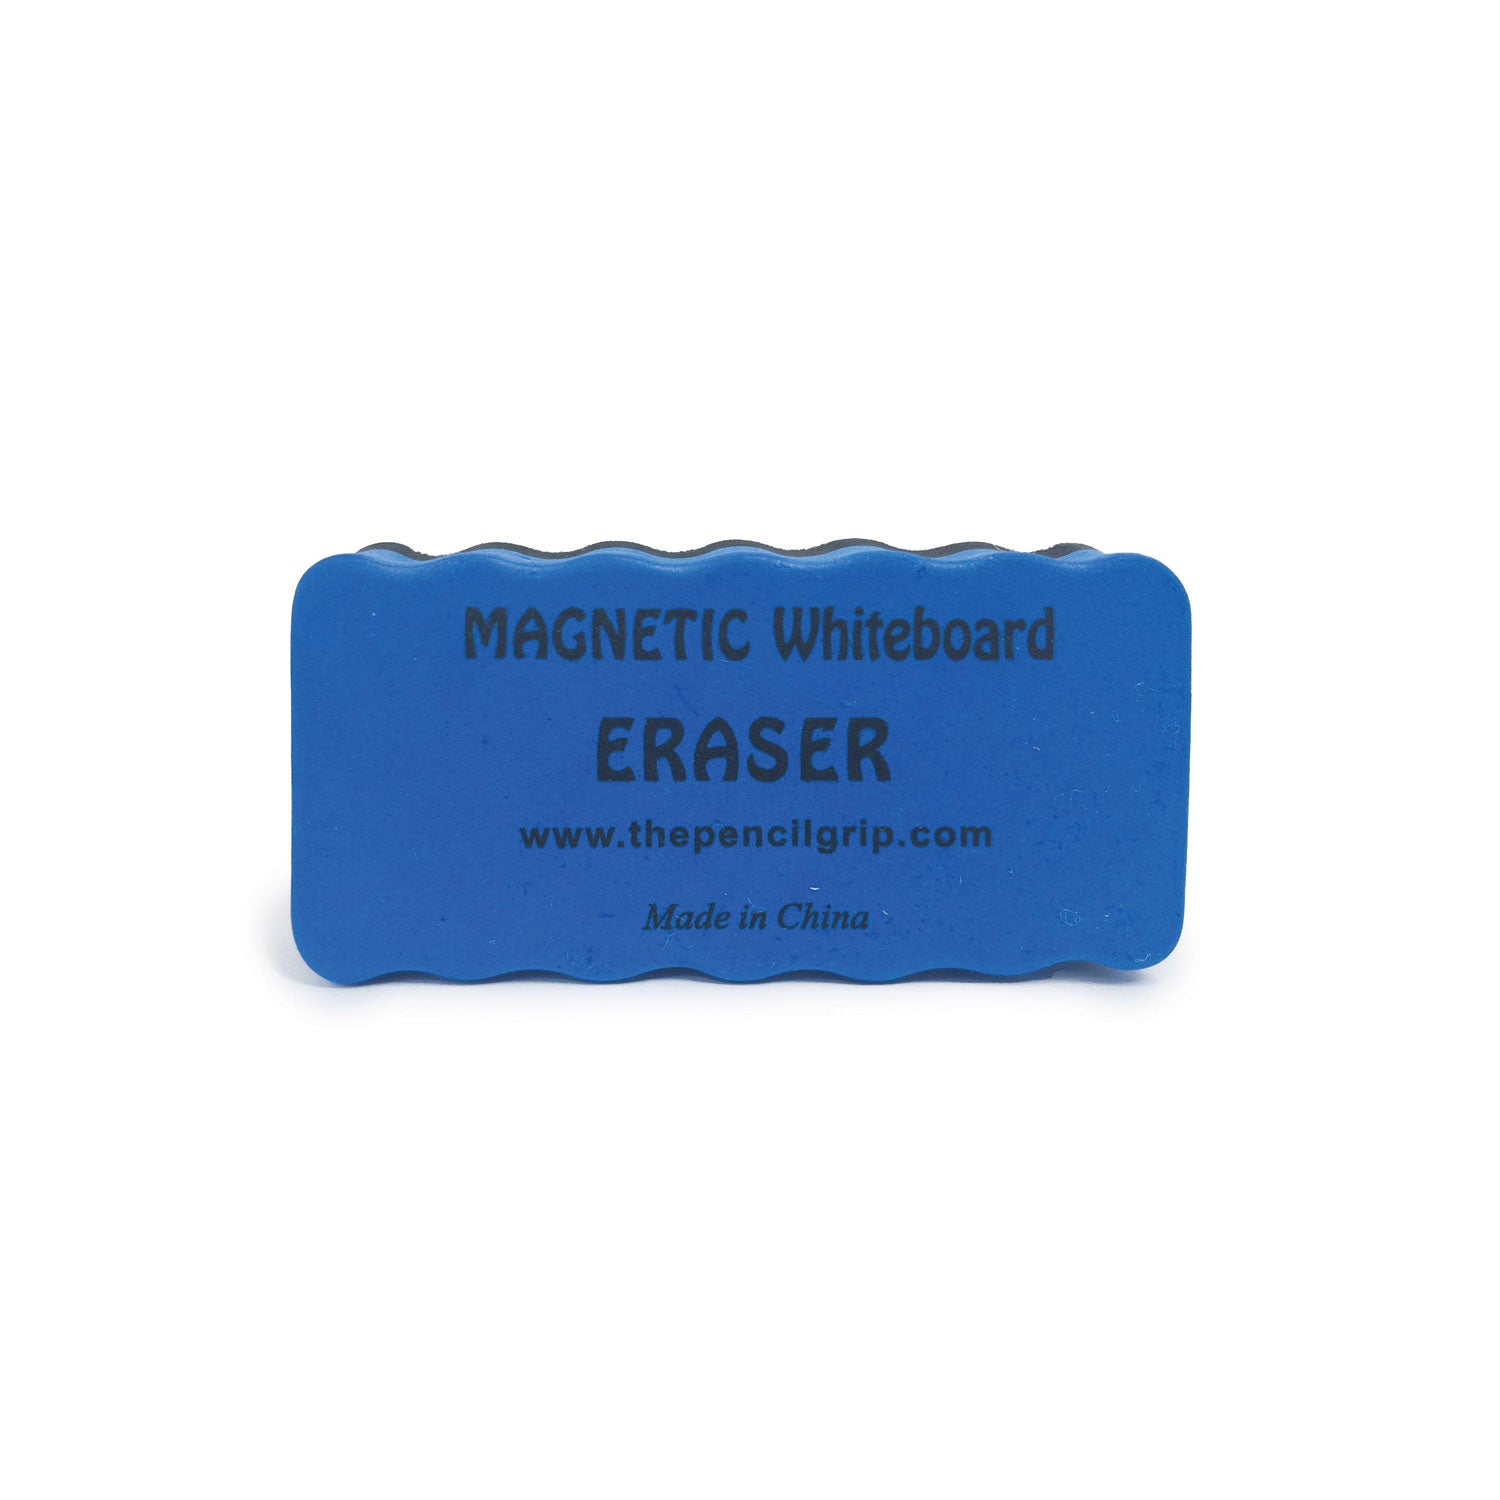 The Pencil Grip Magnetic Whiteboard Eraser Class Pack - 2" Width x 4" Length - Used as Ink Remover, Dirt Remover, Mark Remover - Magnetic, Comfortable Grip, Ergonomic Design - Blue, Black - 24 / Box - 2